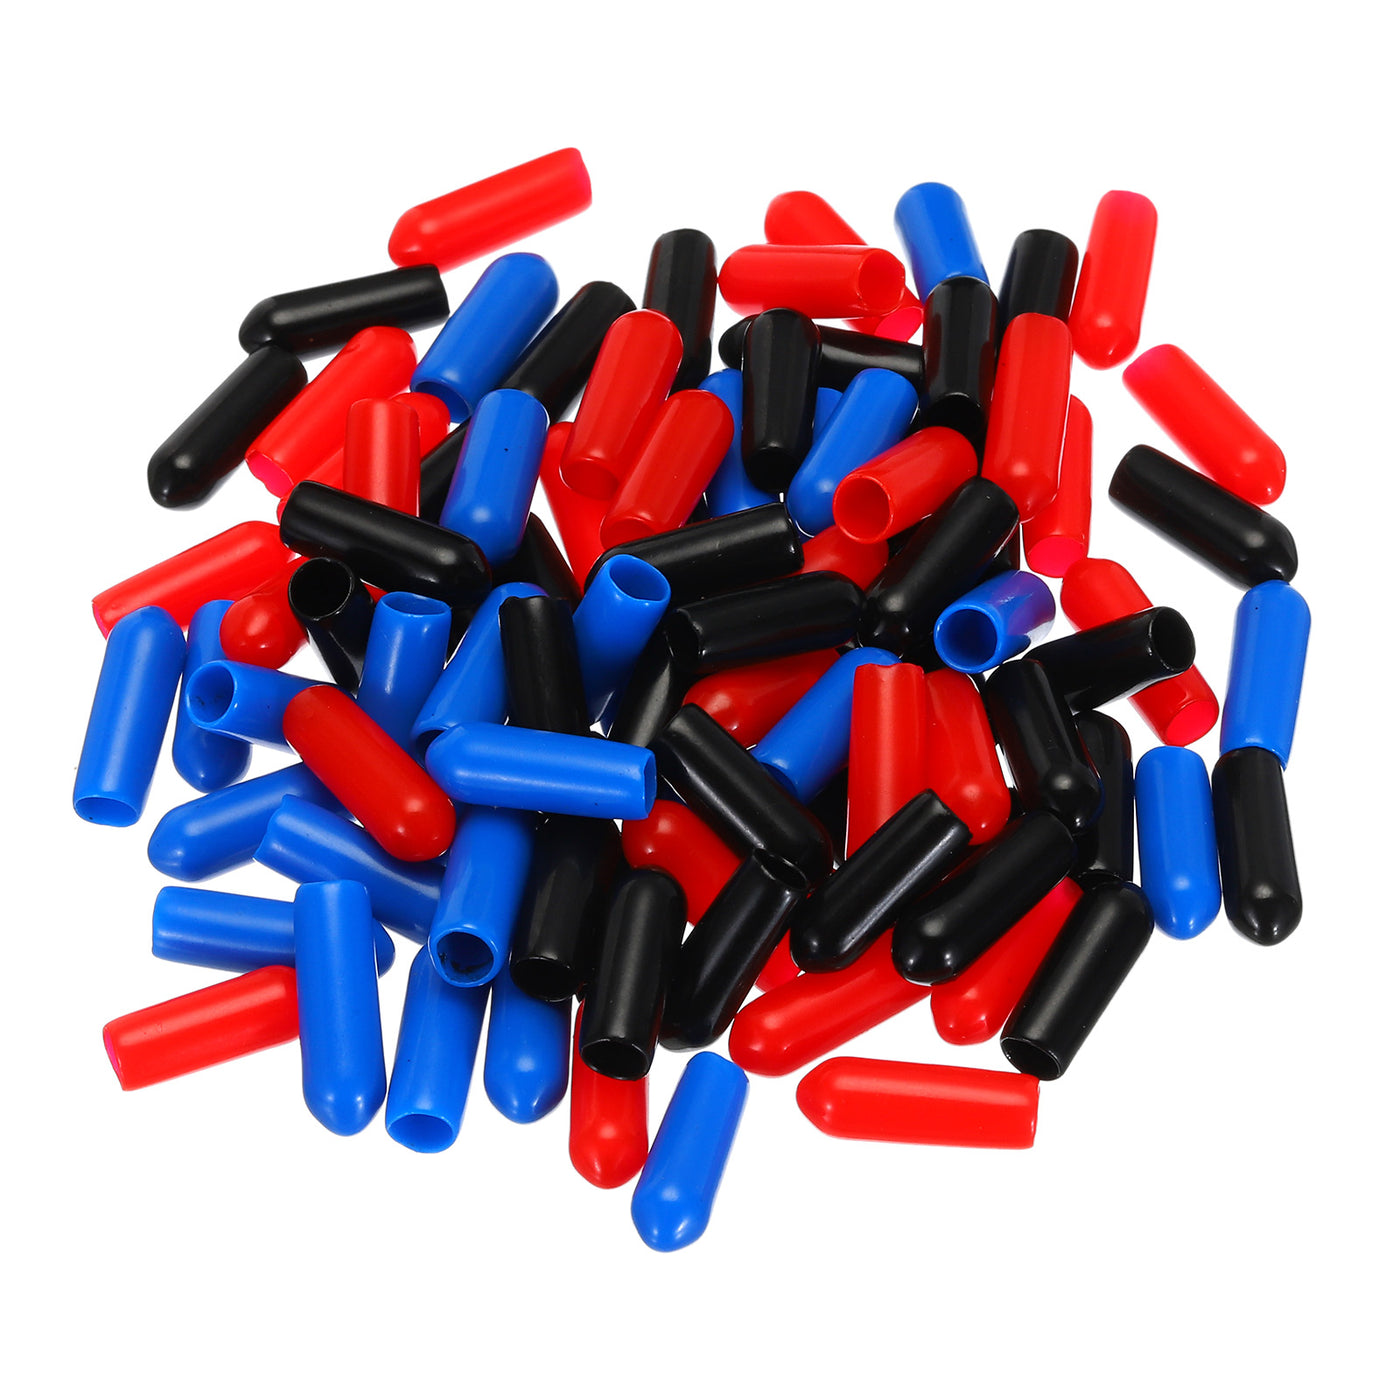 uxcell Uxcell 90pcs Rubber End Caps 5.5mm ID Vinyl PVC Round Tube Bolt Cap Cover Screw Thread Protectors, Black Red Blue